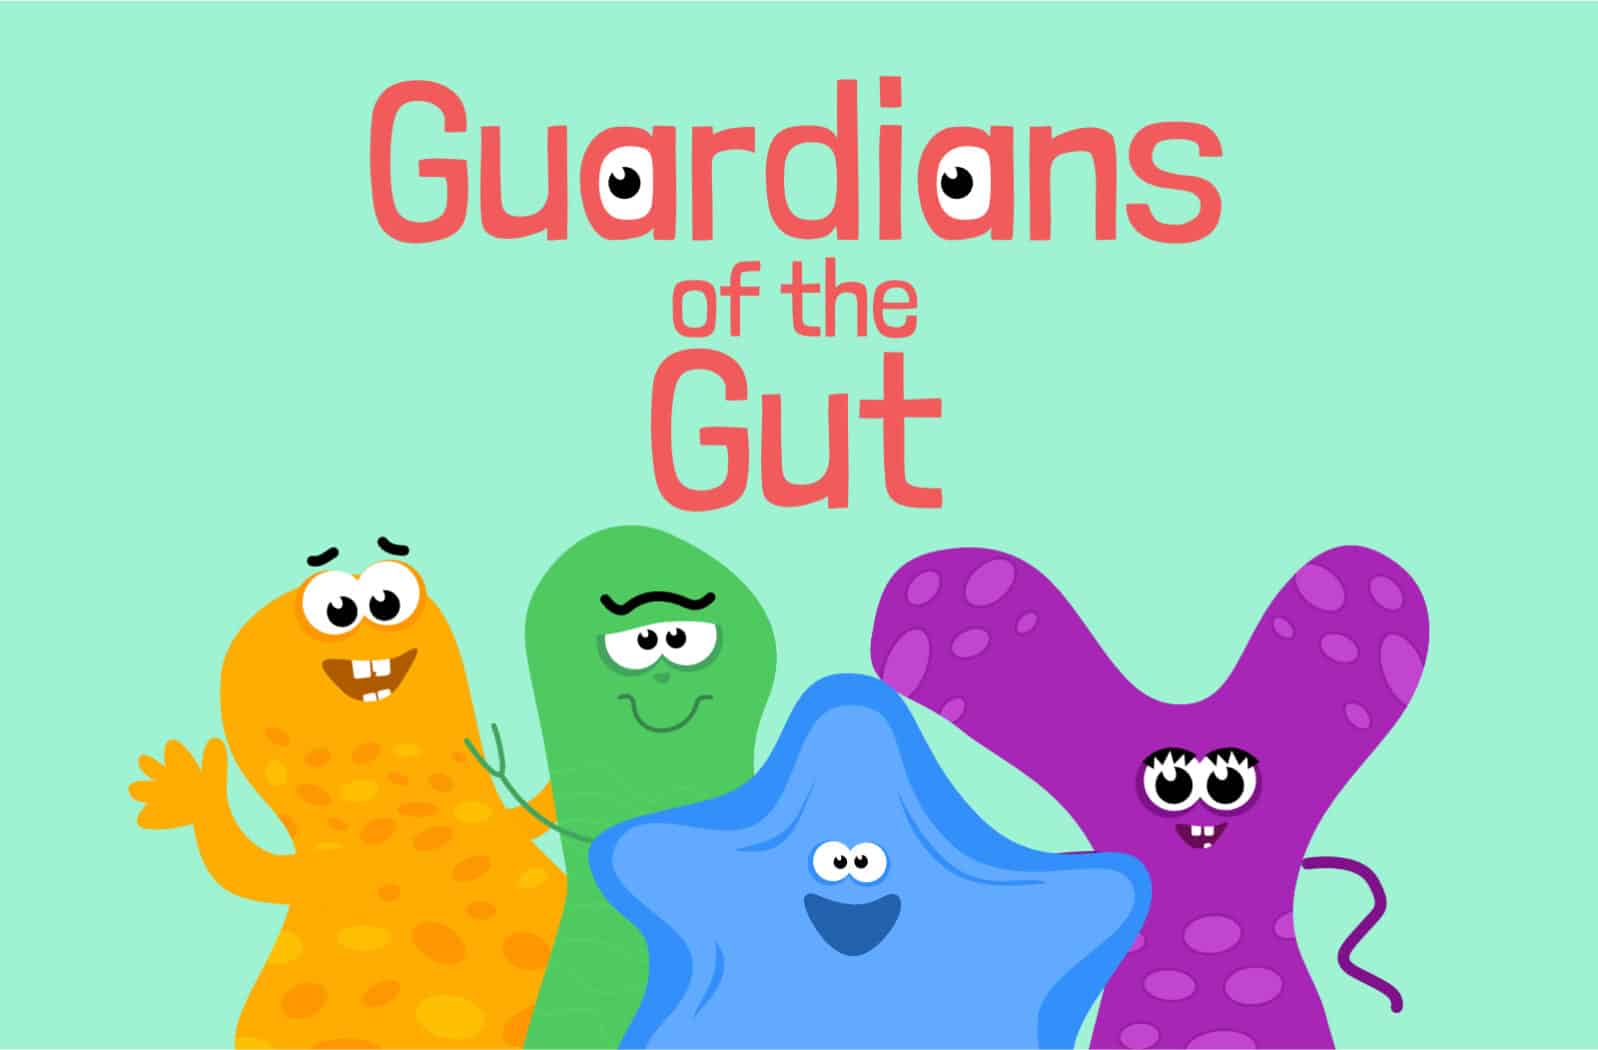 The Guardians of the Gut